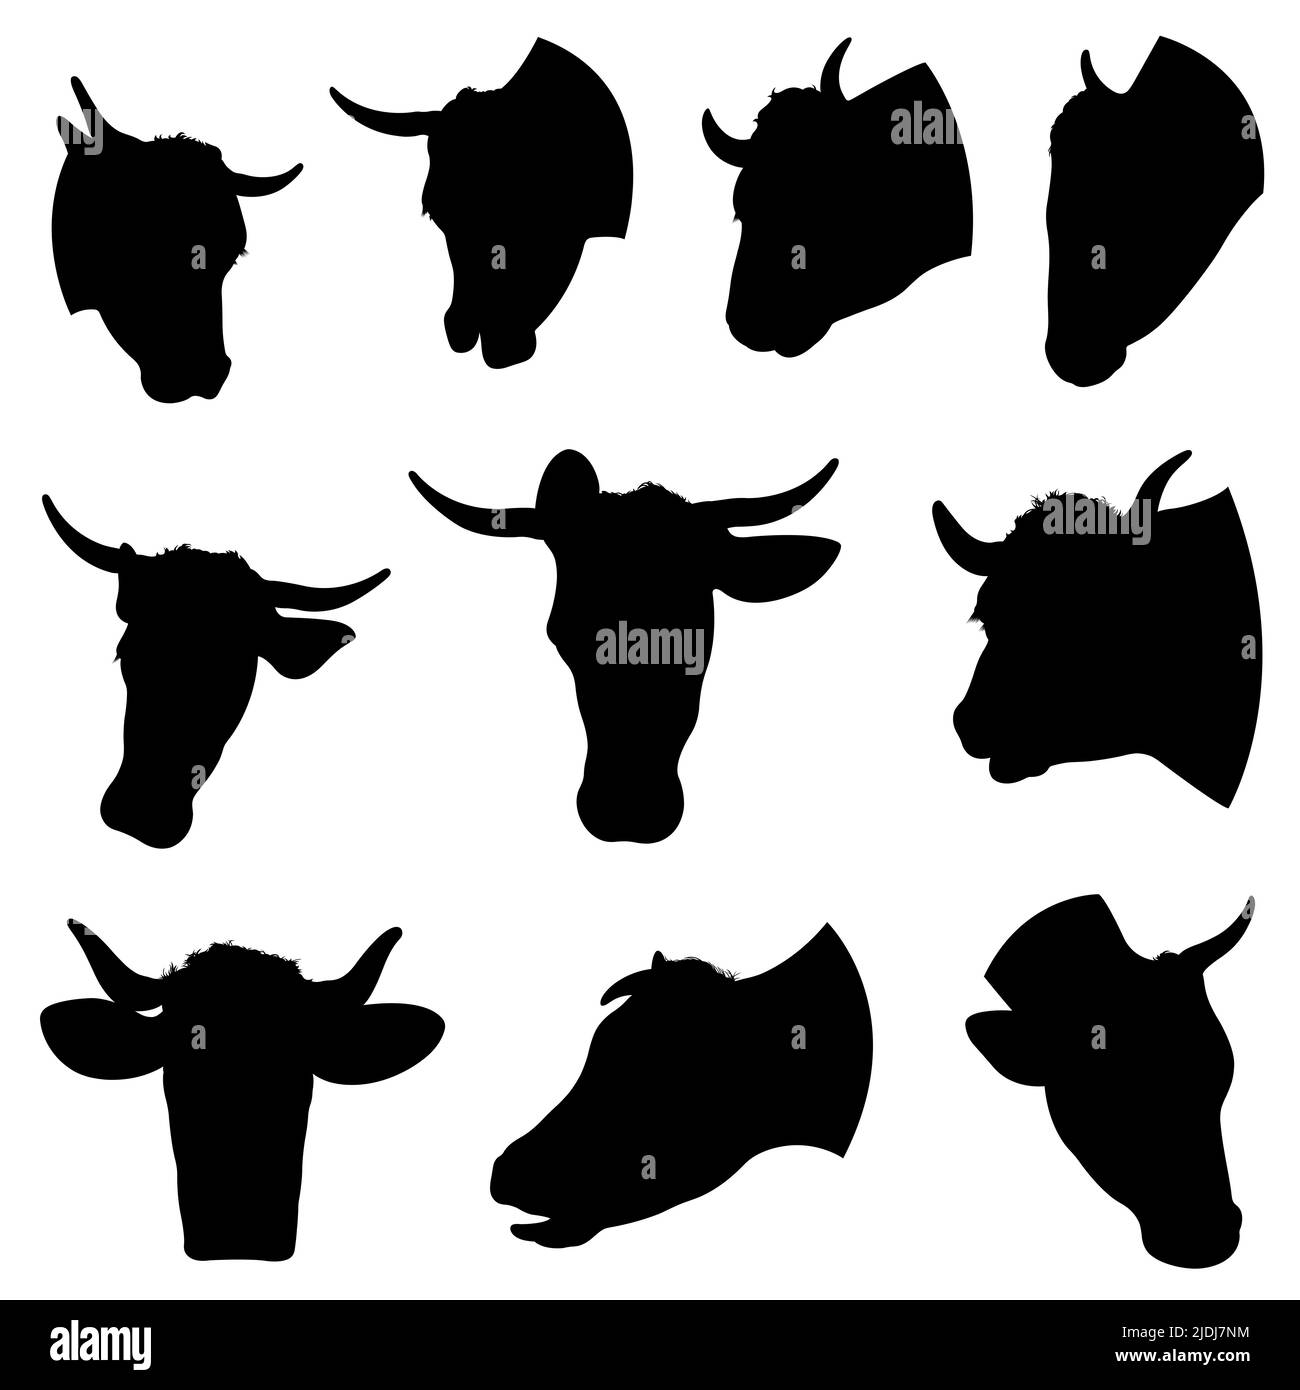 Illustration of different cow heads isolated on white Stock Photo